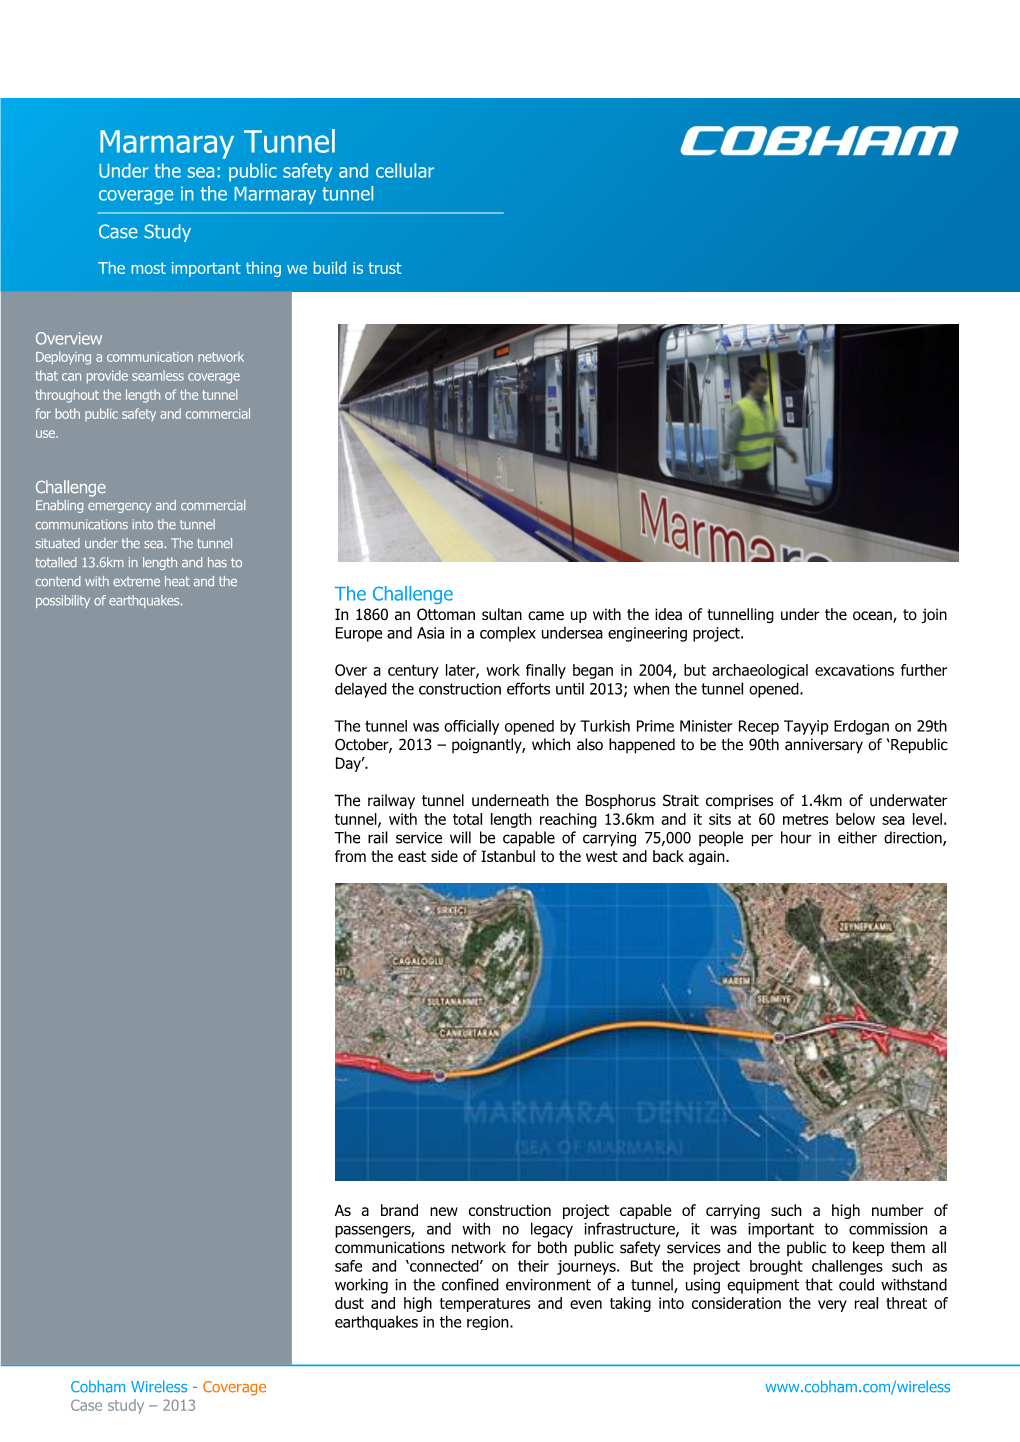 Marmaray Tunnel Under the Sea: Public Safety and Cellular Coverage in the Marmaray Tunnel